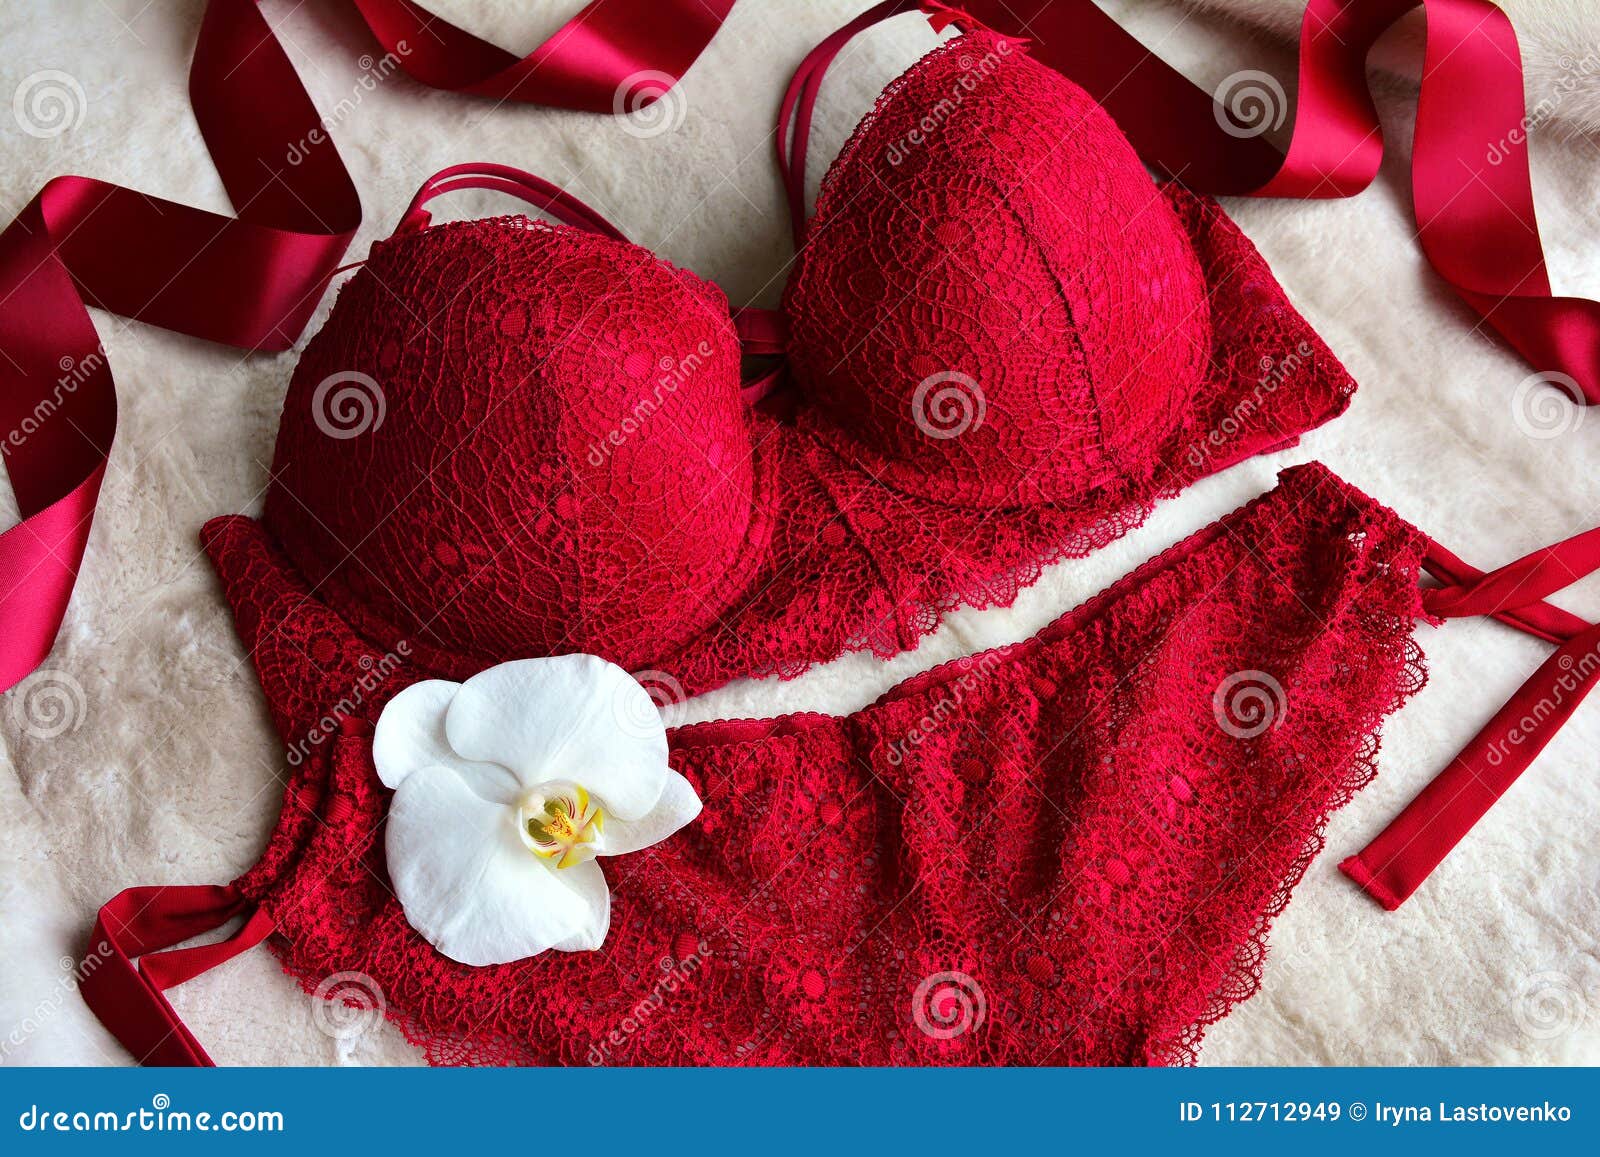 Women`s Lace Underwear of Red, Wine Color: Bra and Panties. Stock Image -  Image of femininity, beautiful: 112712949